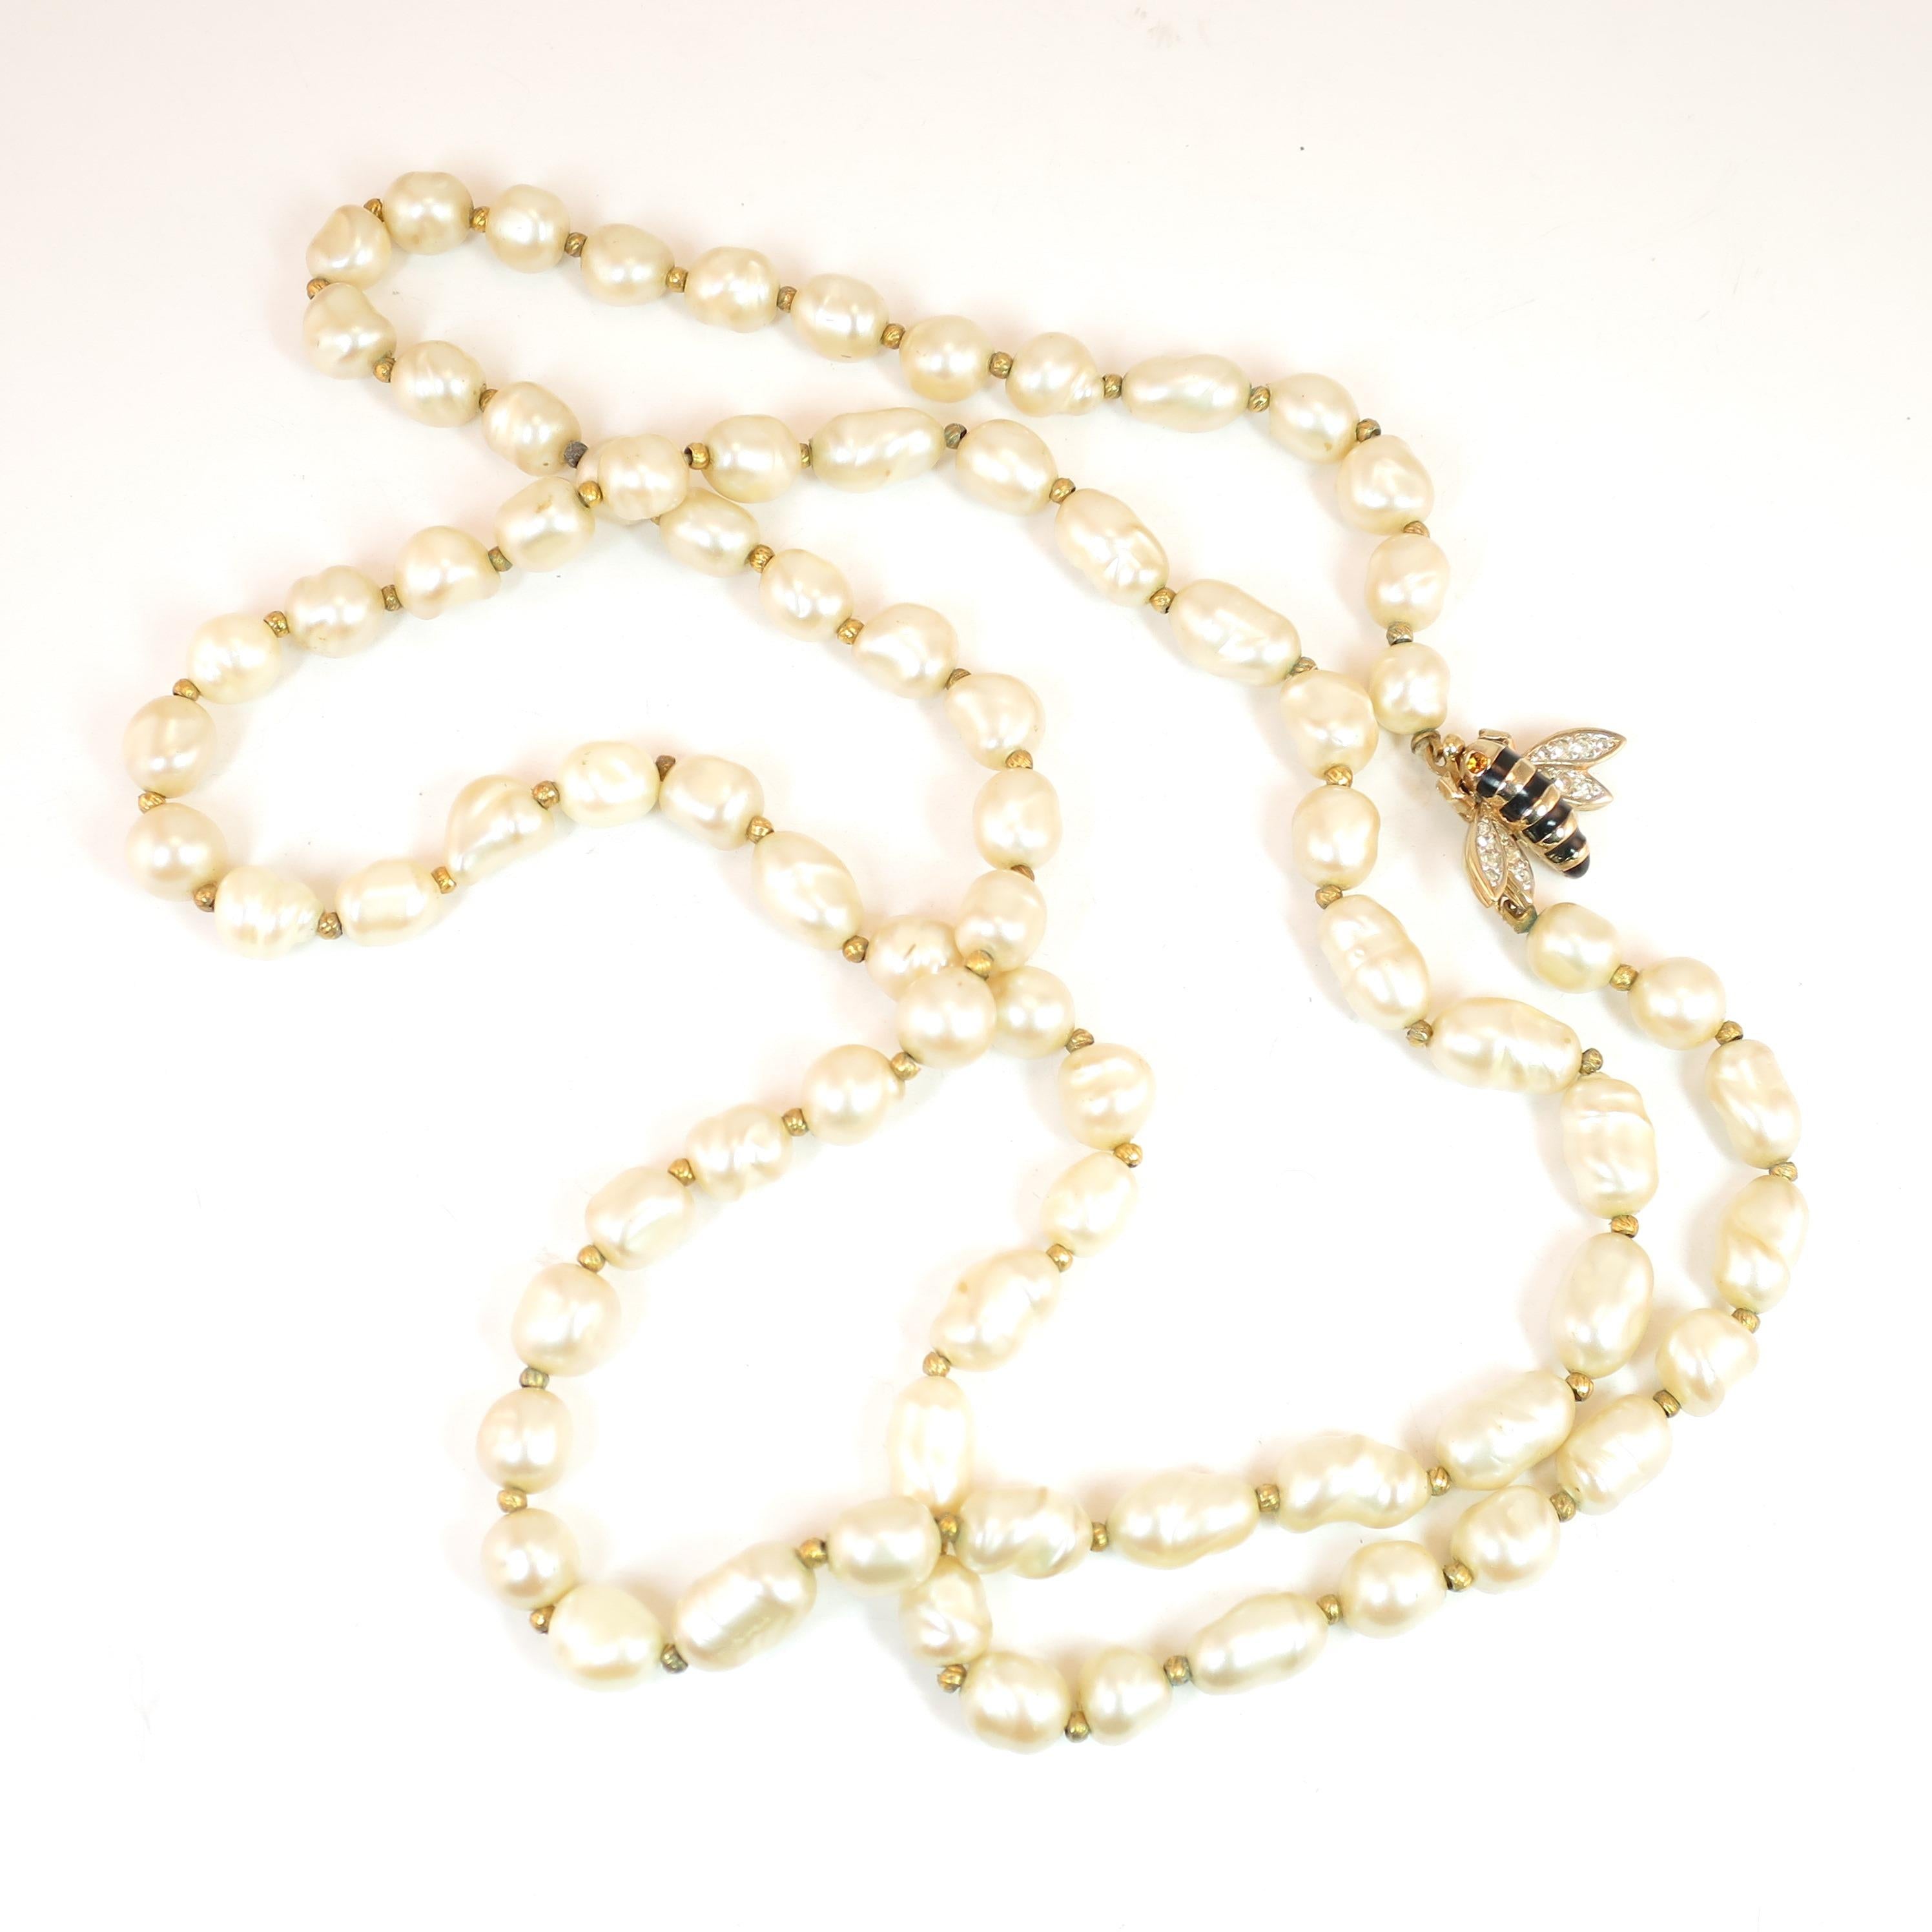 Offered here is a long Panetta faux baroque pearl necklace with a gilded and enameled bee clasp, from the 1950s. There is a single strand of iridescent cream-colored glass baroque pearls, separated by tiny gold-plated seed beads; it is finished with